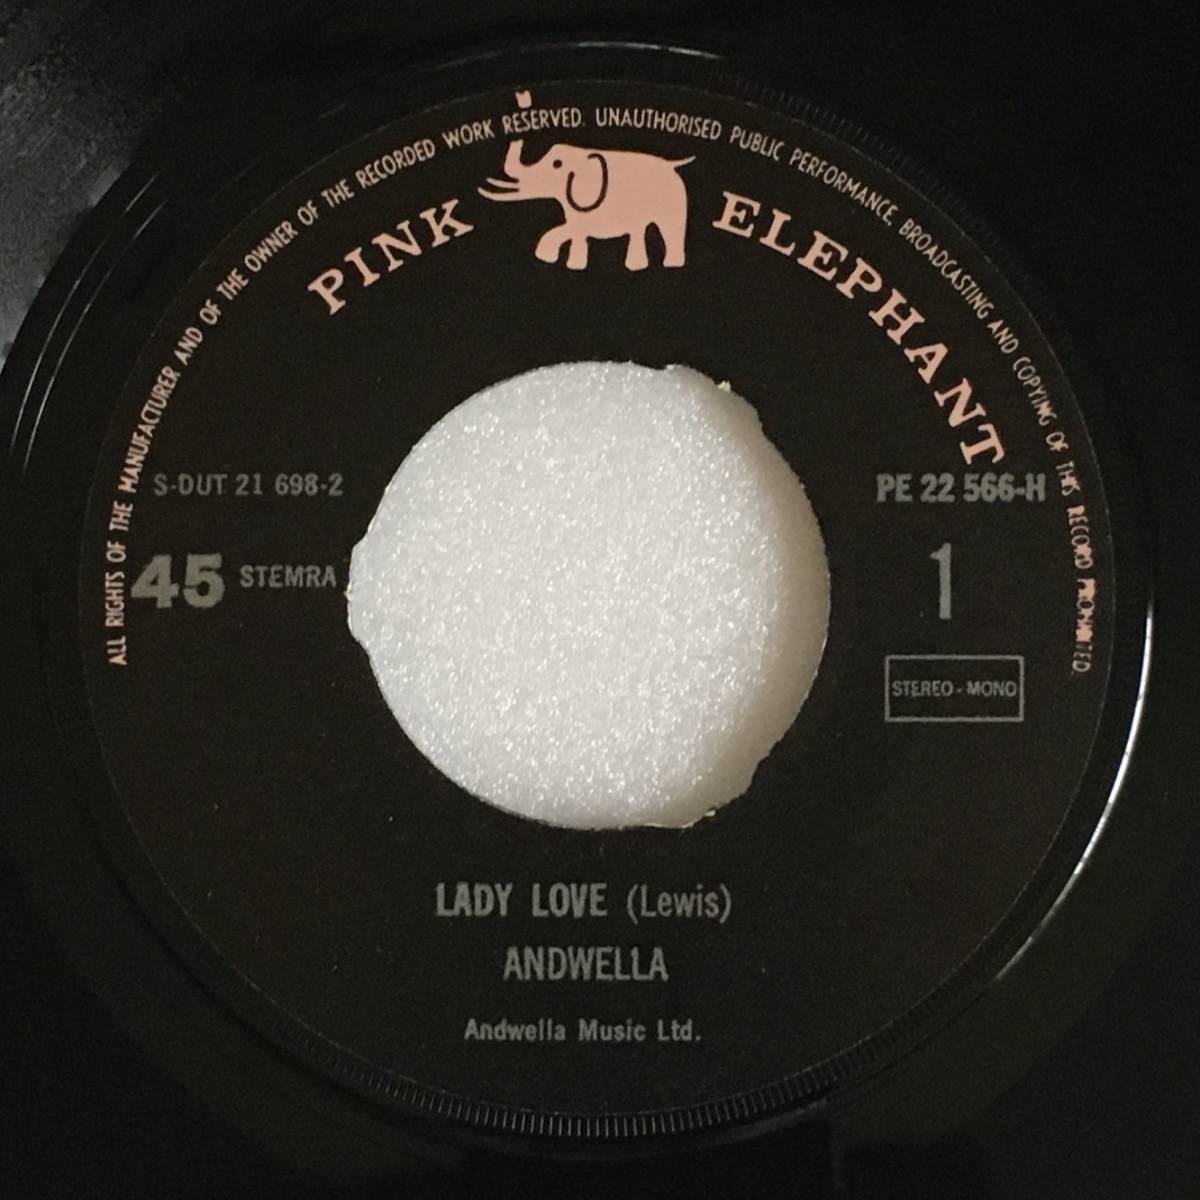 ANDWELLA「LADY LOVE」NETHERLANDS ORIGINAL PINK ELEPHANT PE 22.566 H '71 7INCH SINGLE NETHERLANDS ONLY RELEASE with PICTURE SLEEVE_画像5